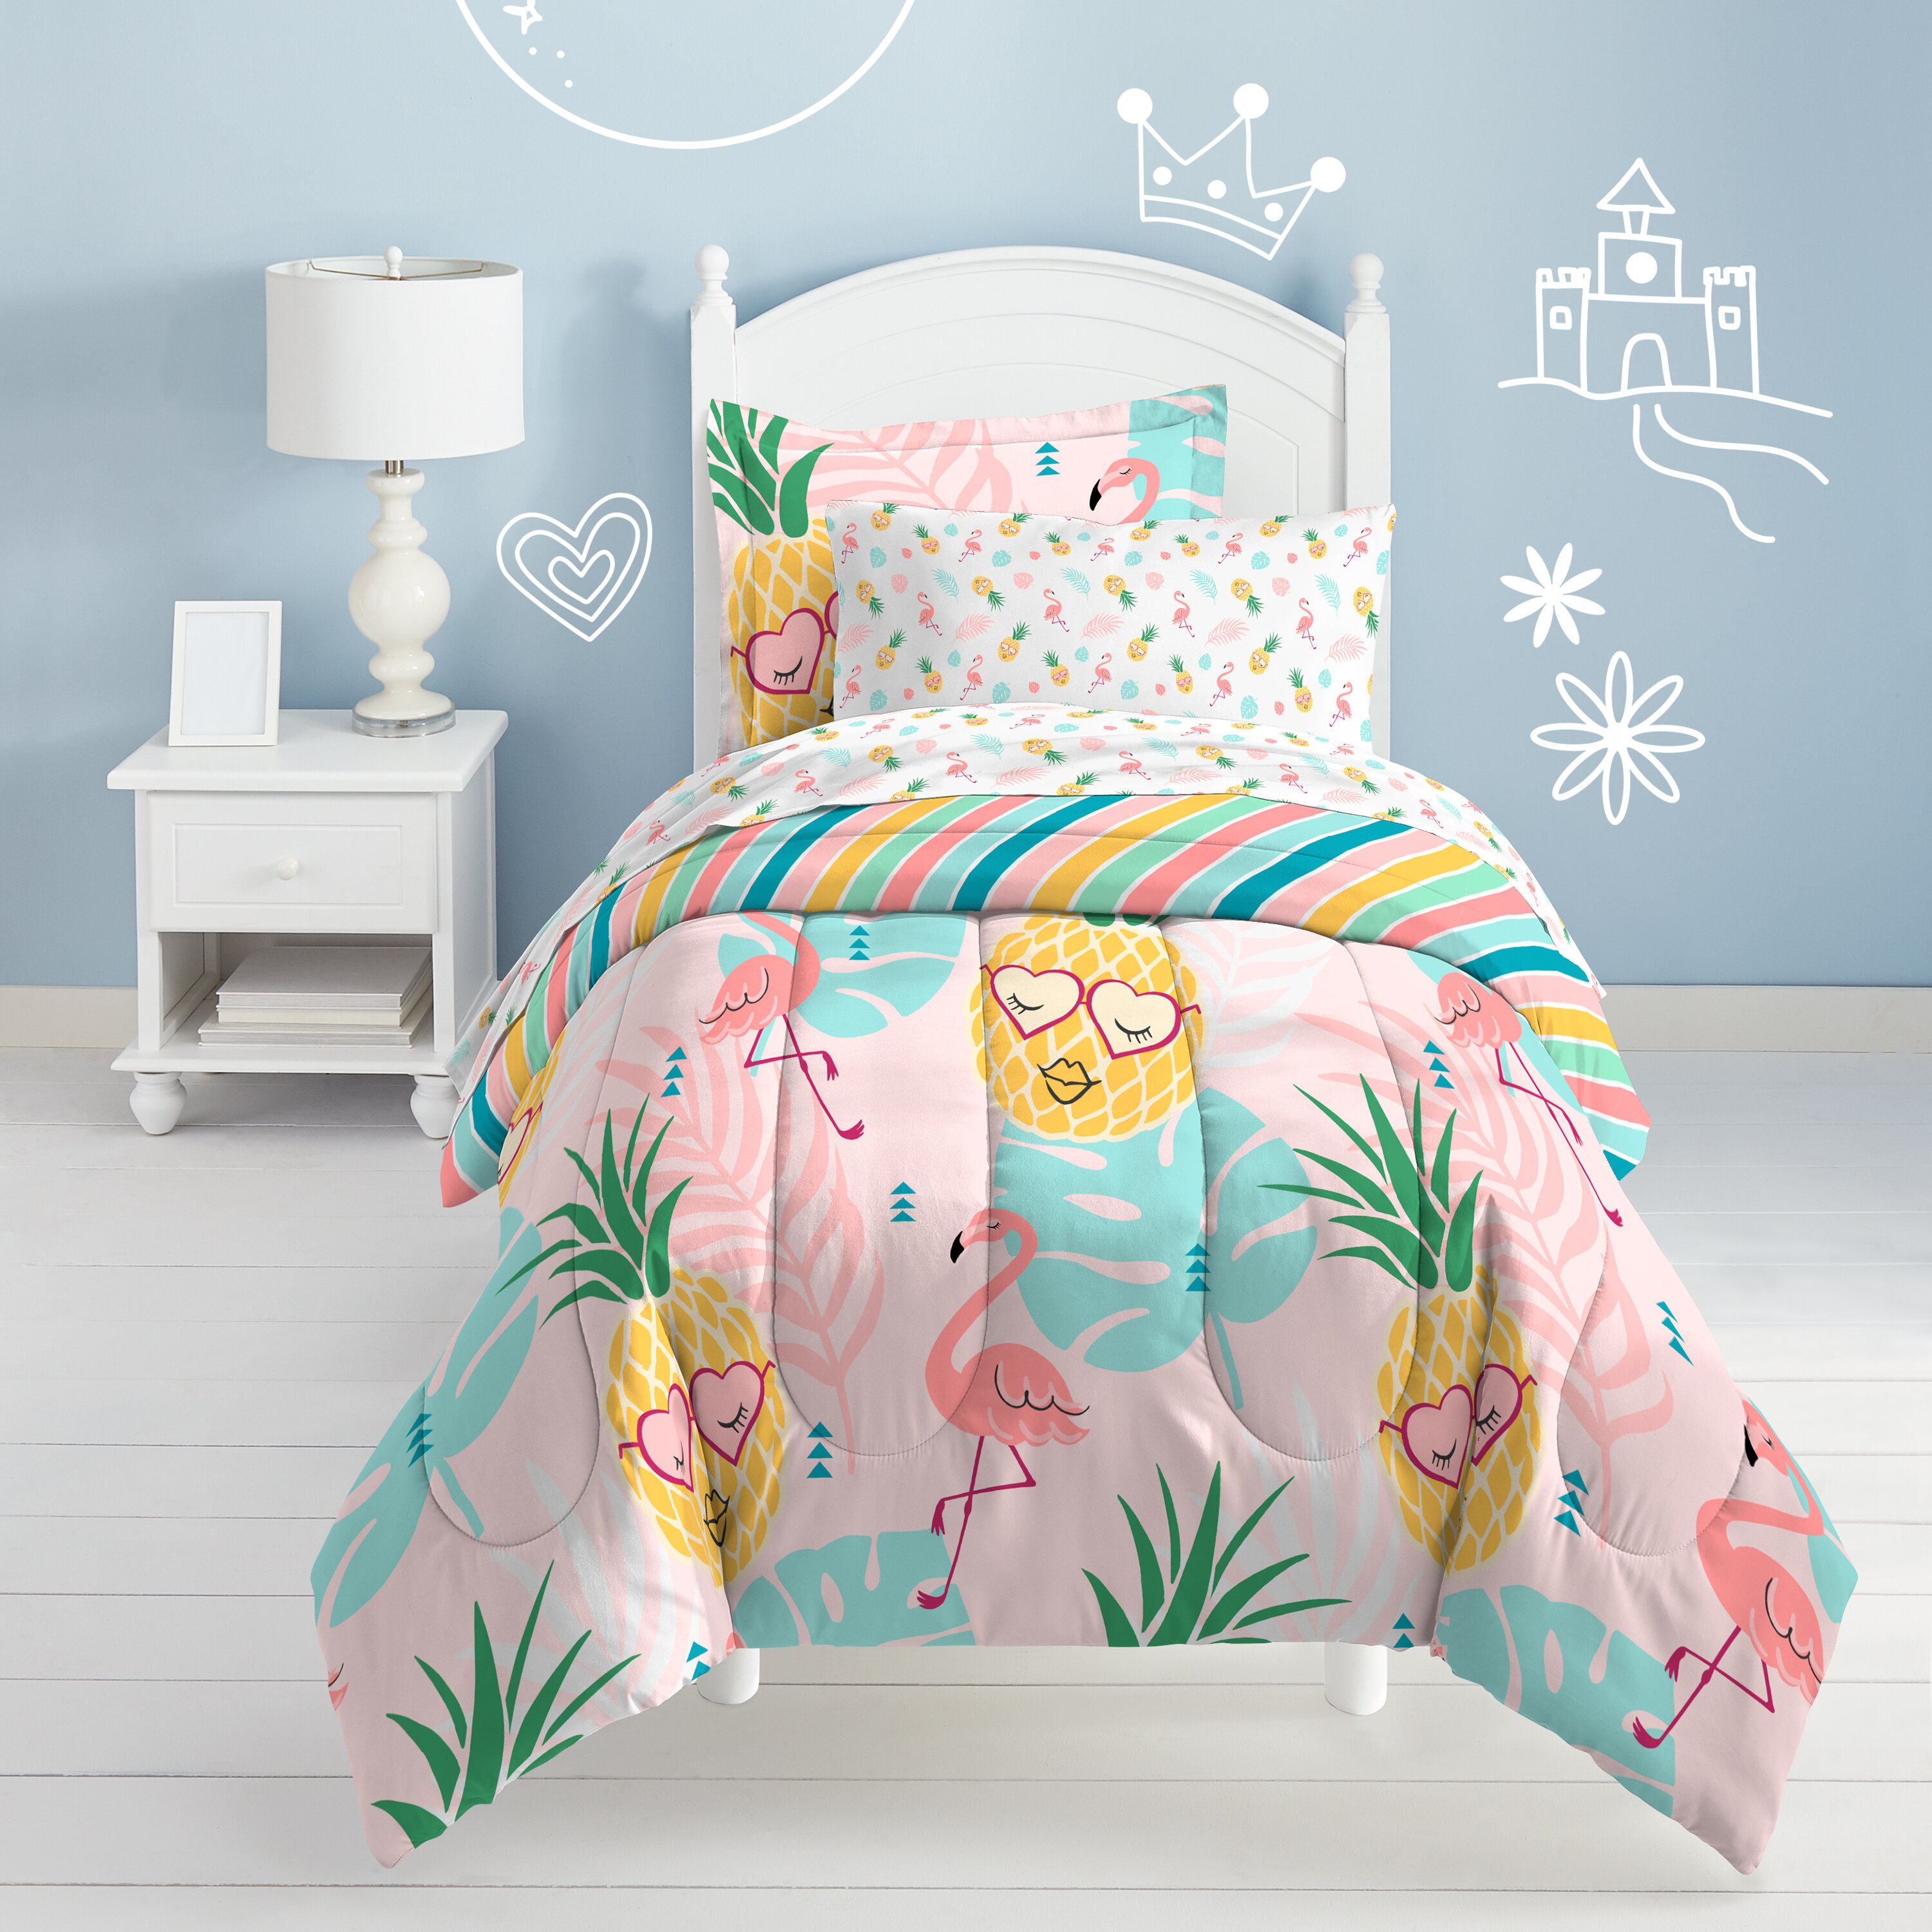 naptime clipart bed covers